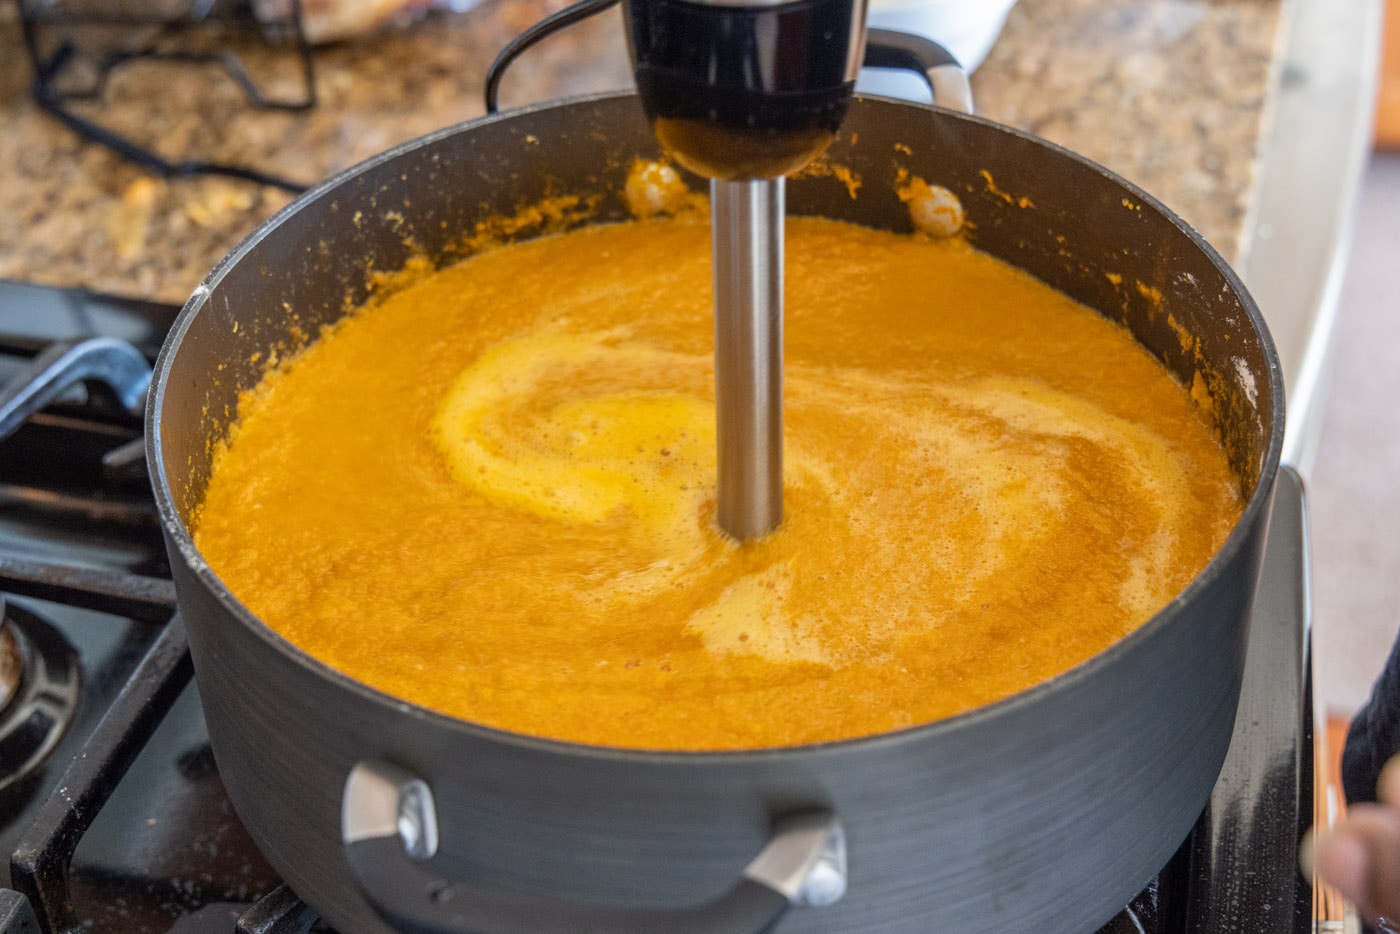 blending heavy cream into lobster soup